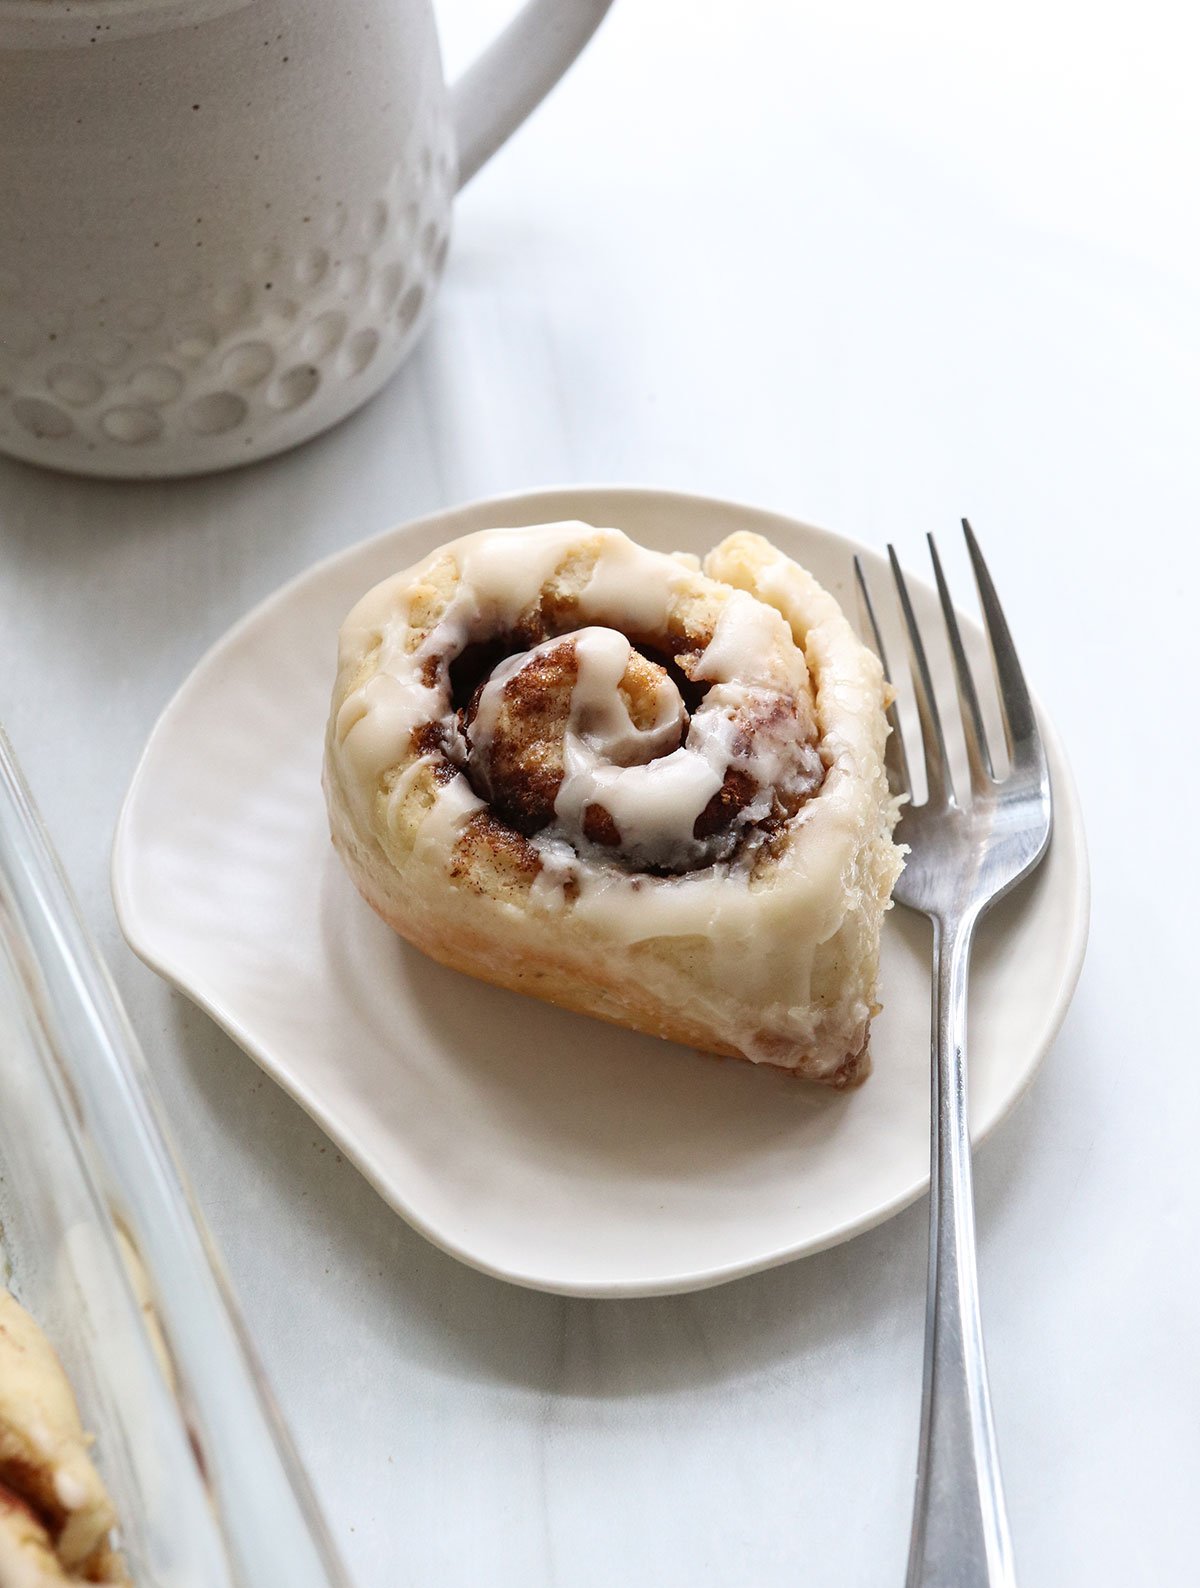 gluten free cinnamon roll served on white plate with fork.